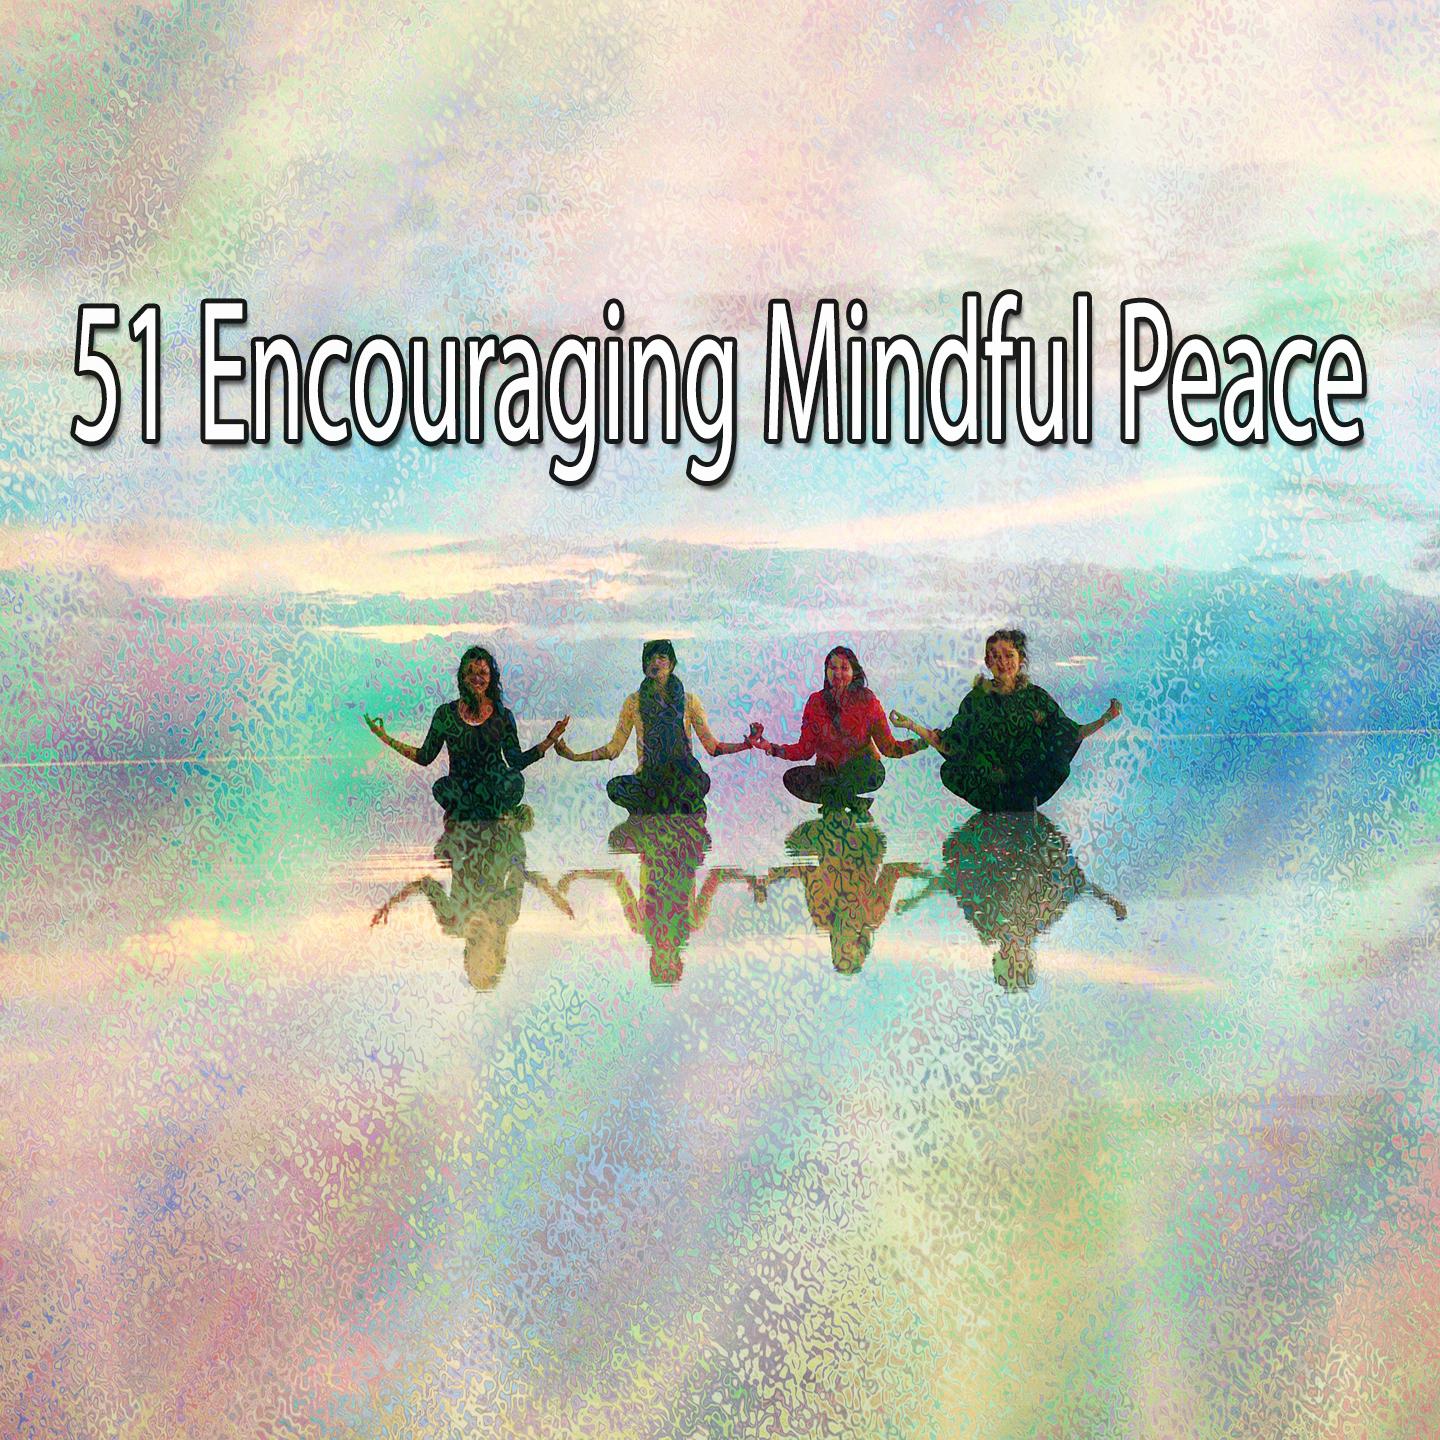 51 Encouraging Mindful Peace